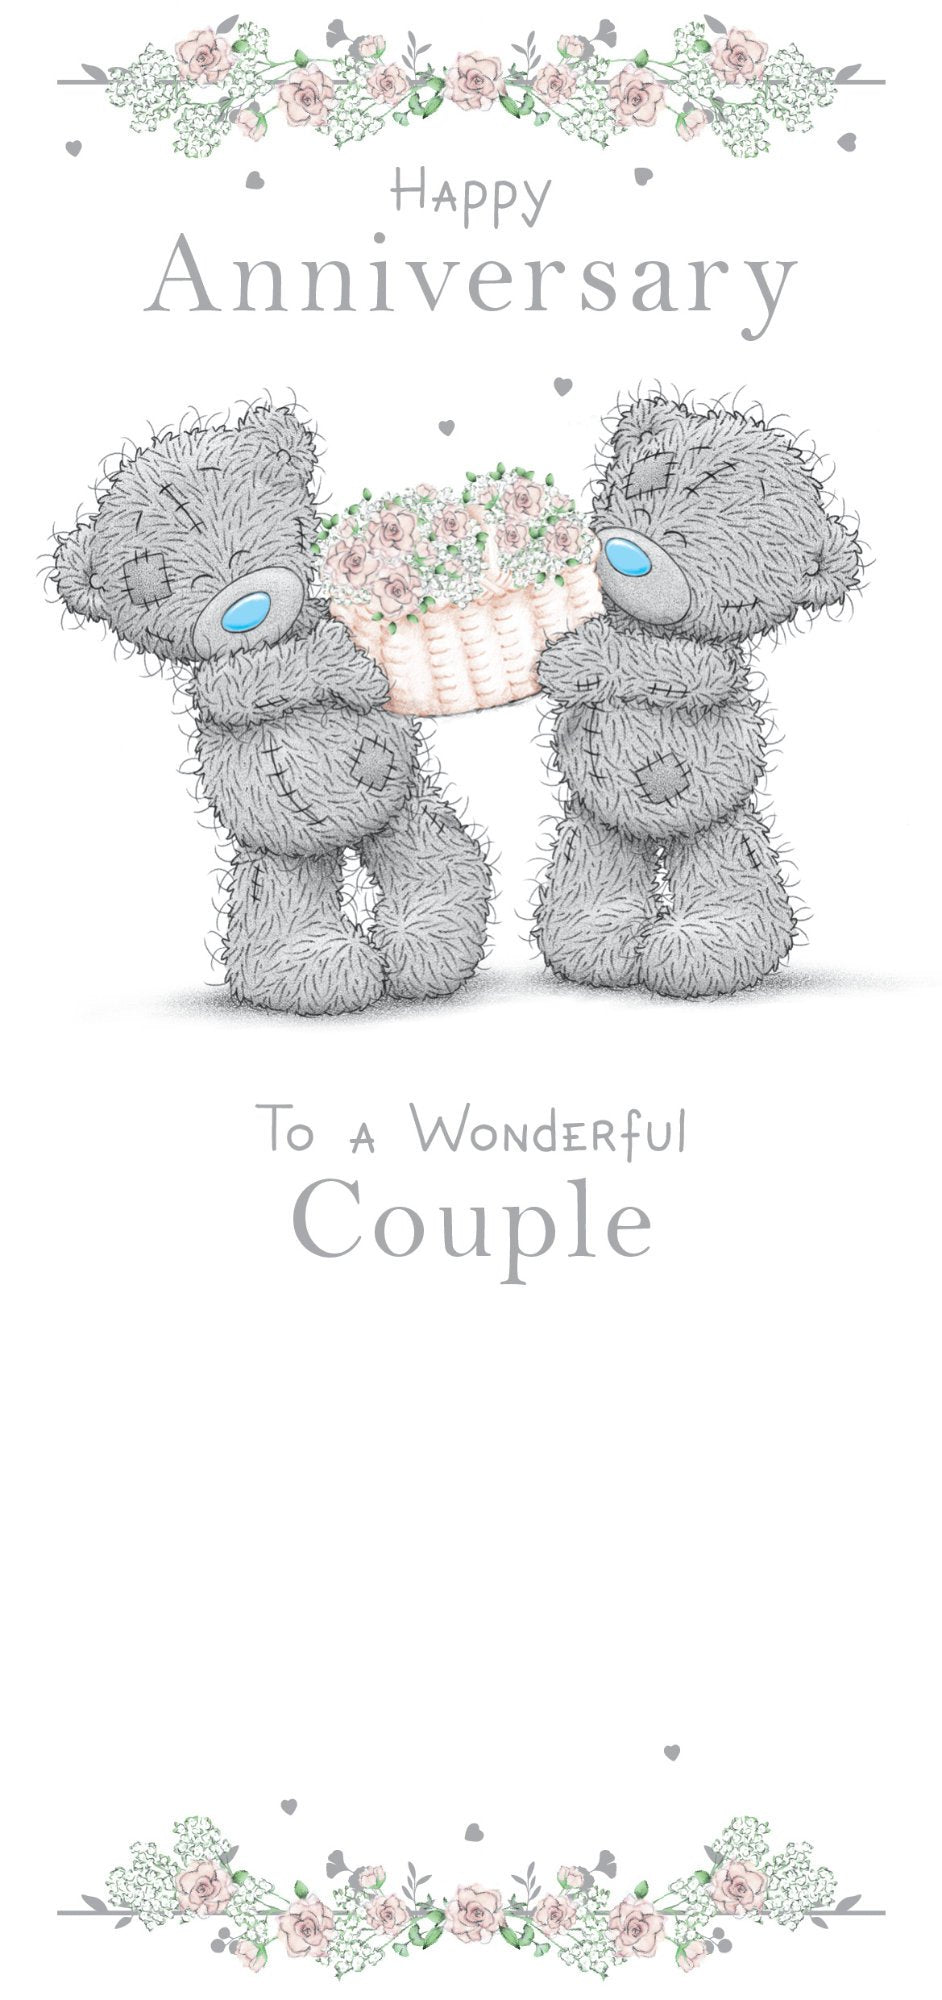 Photograph of Anniversary Couple Teddies Basket Greetings Card at Nicole's Shop